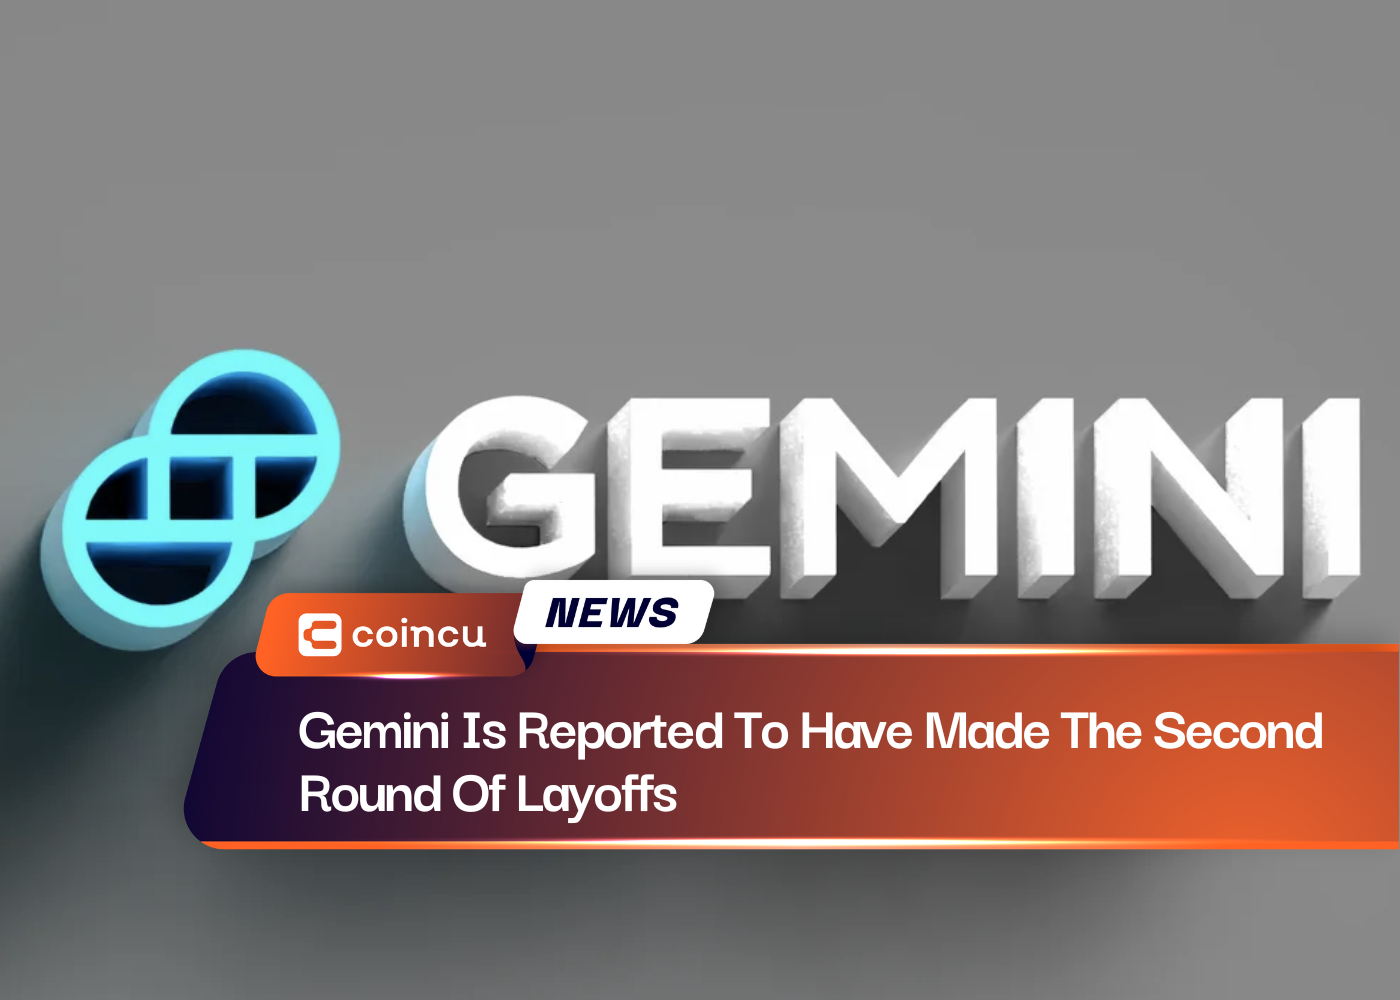 Gemini Is Reported To Have Made The Second Round Of Layoffs